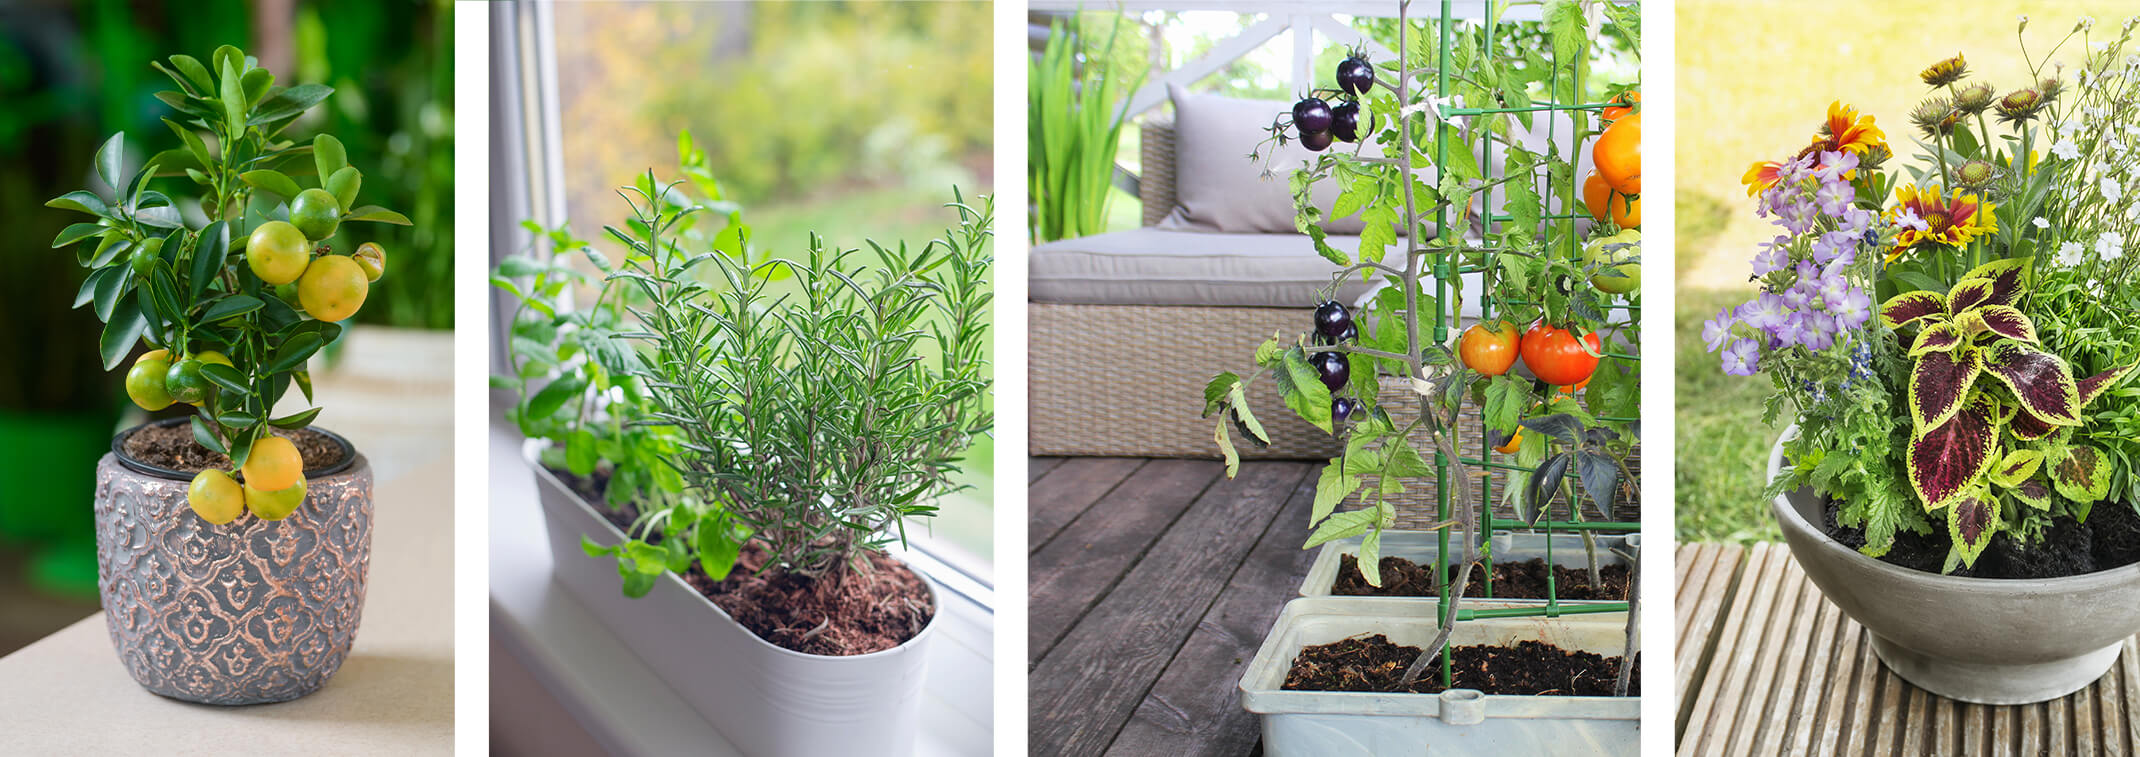 4 images: a dwarf citrus tree in a small pot; a long pot of herbs on a window sill; tomatoes planted in rectangular pots on a deck near seating; a small round pot with a variety of plants in it on a table outside